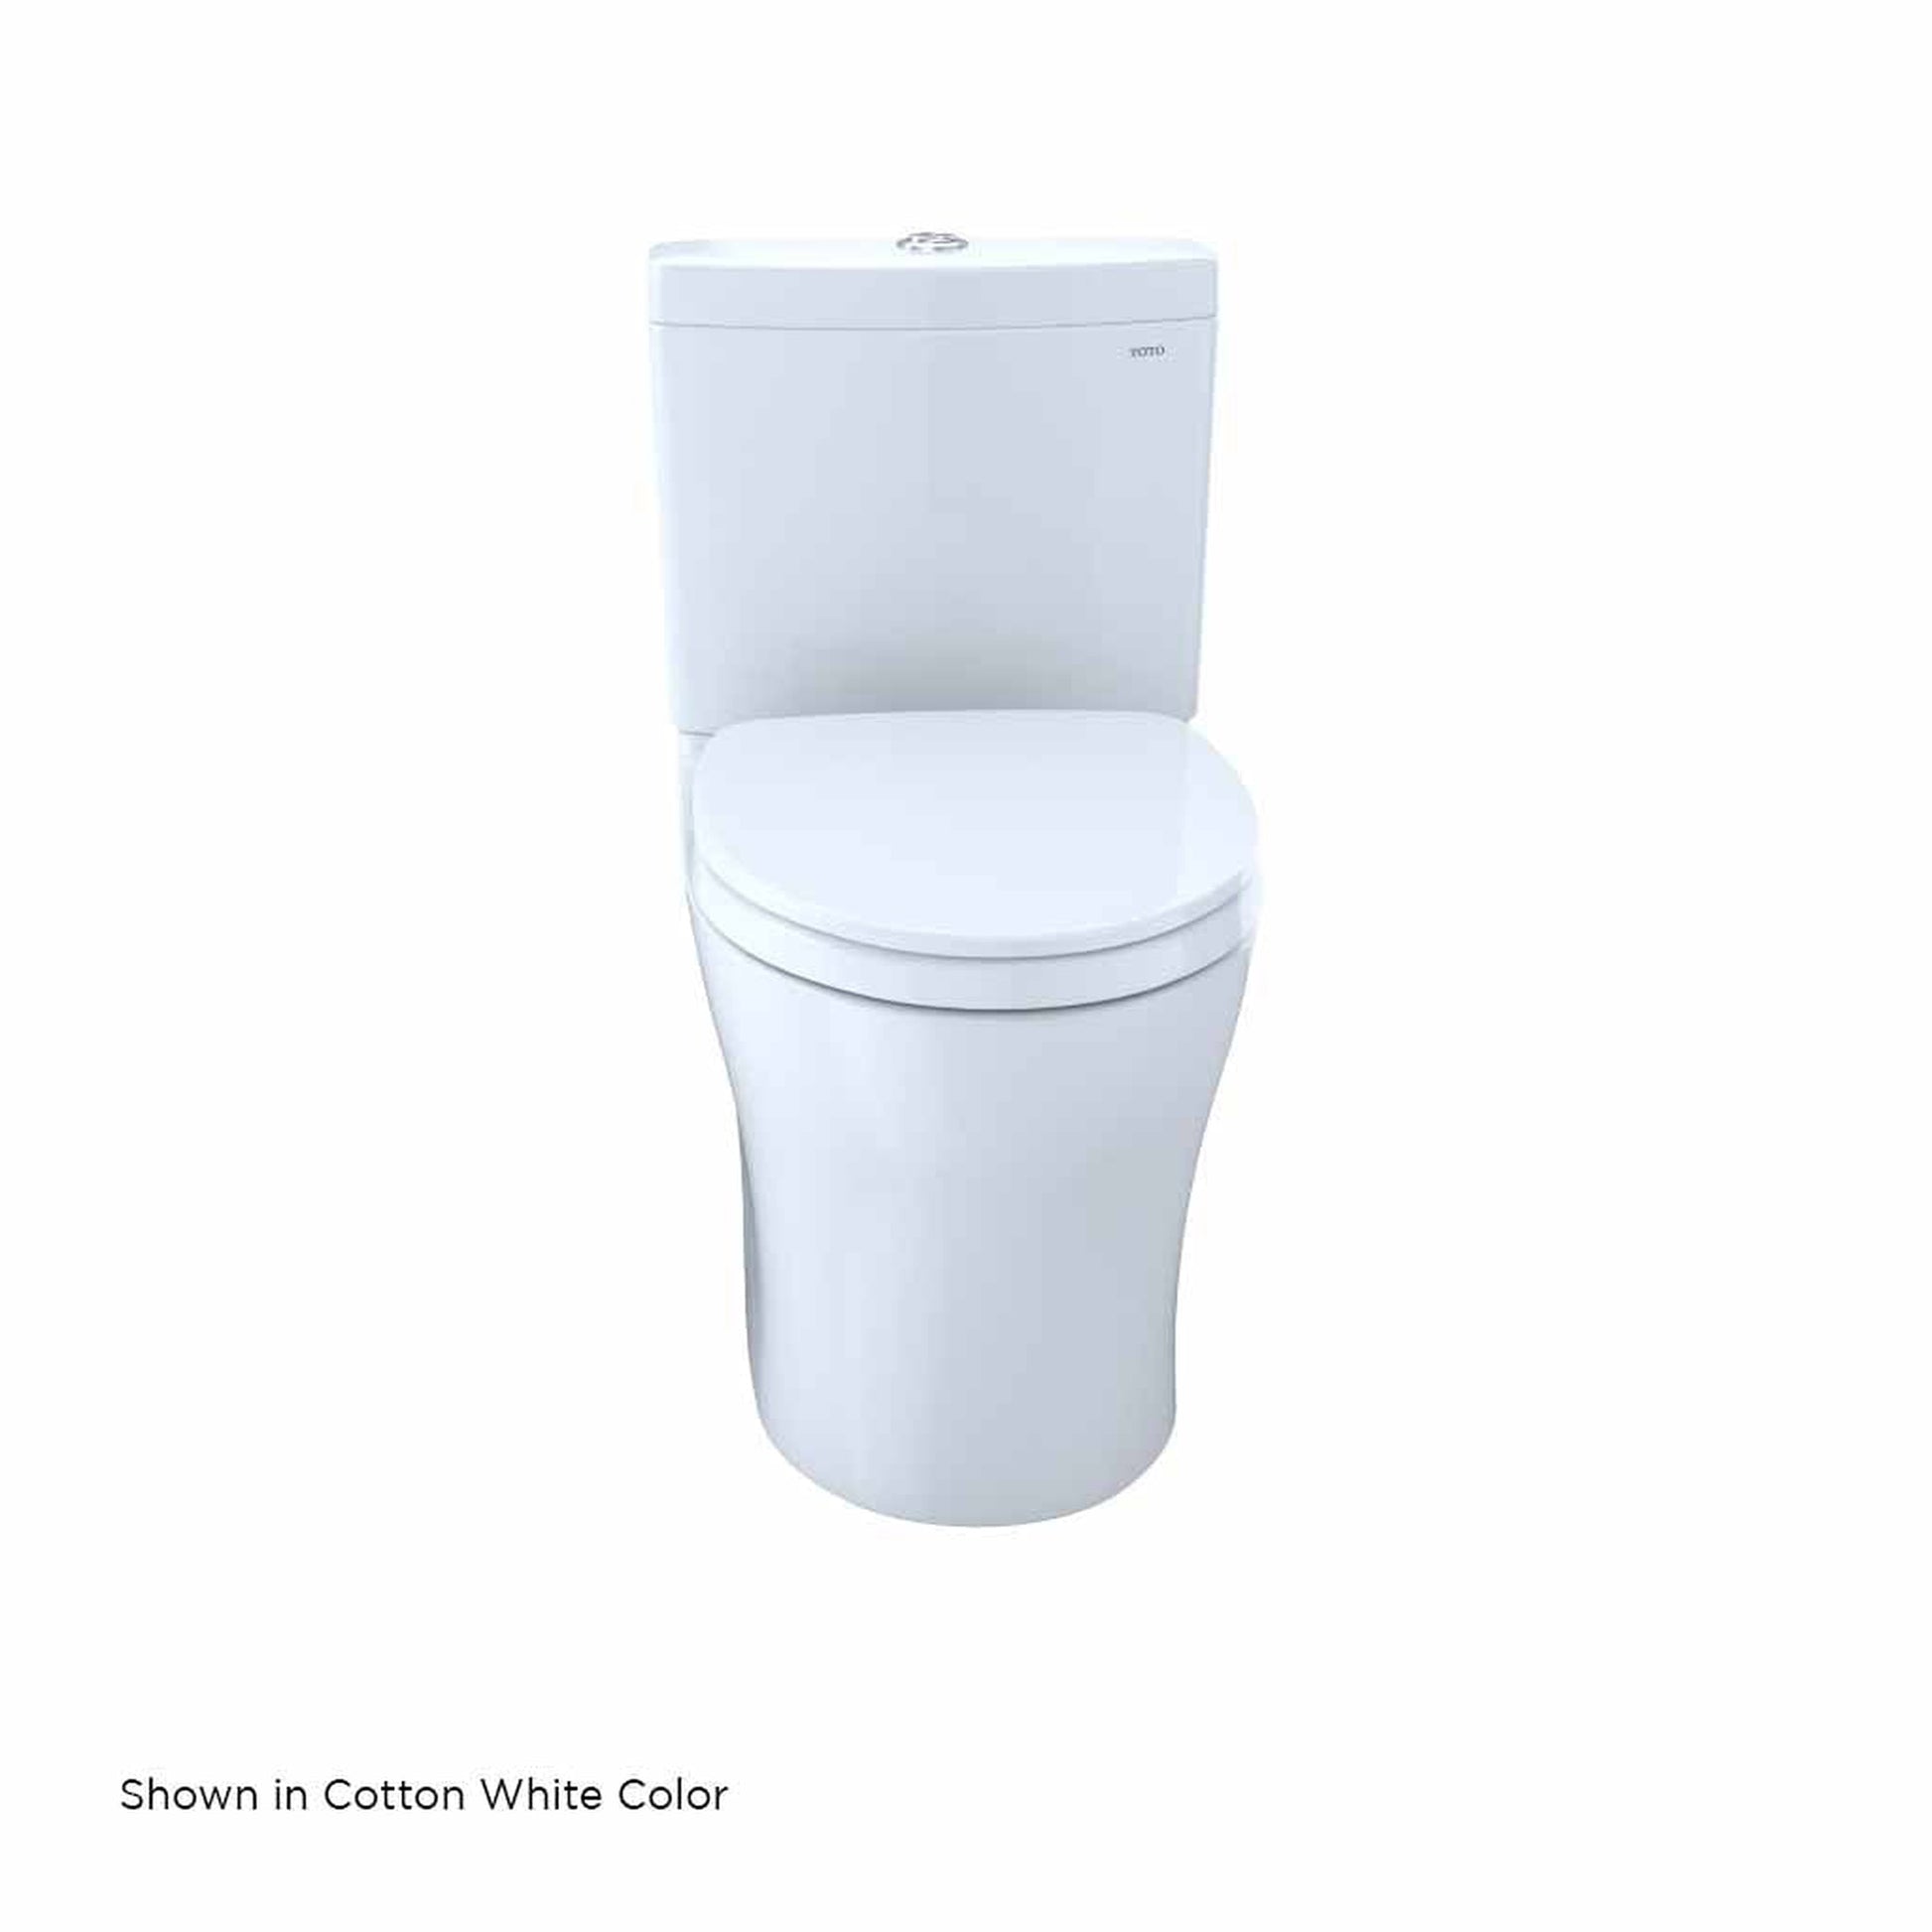 TOTO Aquia IV Ebony 1.28 GPF & 0.8 GPF Dual-Flush Two-Piece Elongated Chair Height Toilet With WASHLET+ Connection - SoftClose Seat Included